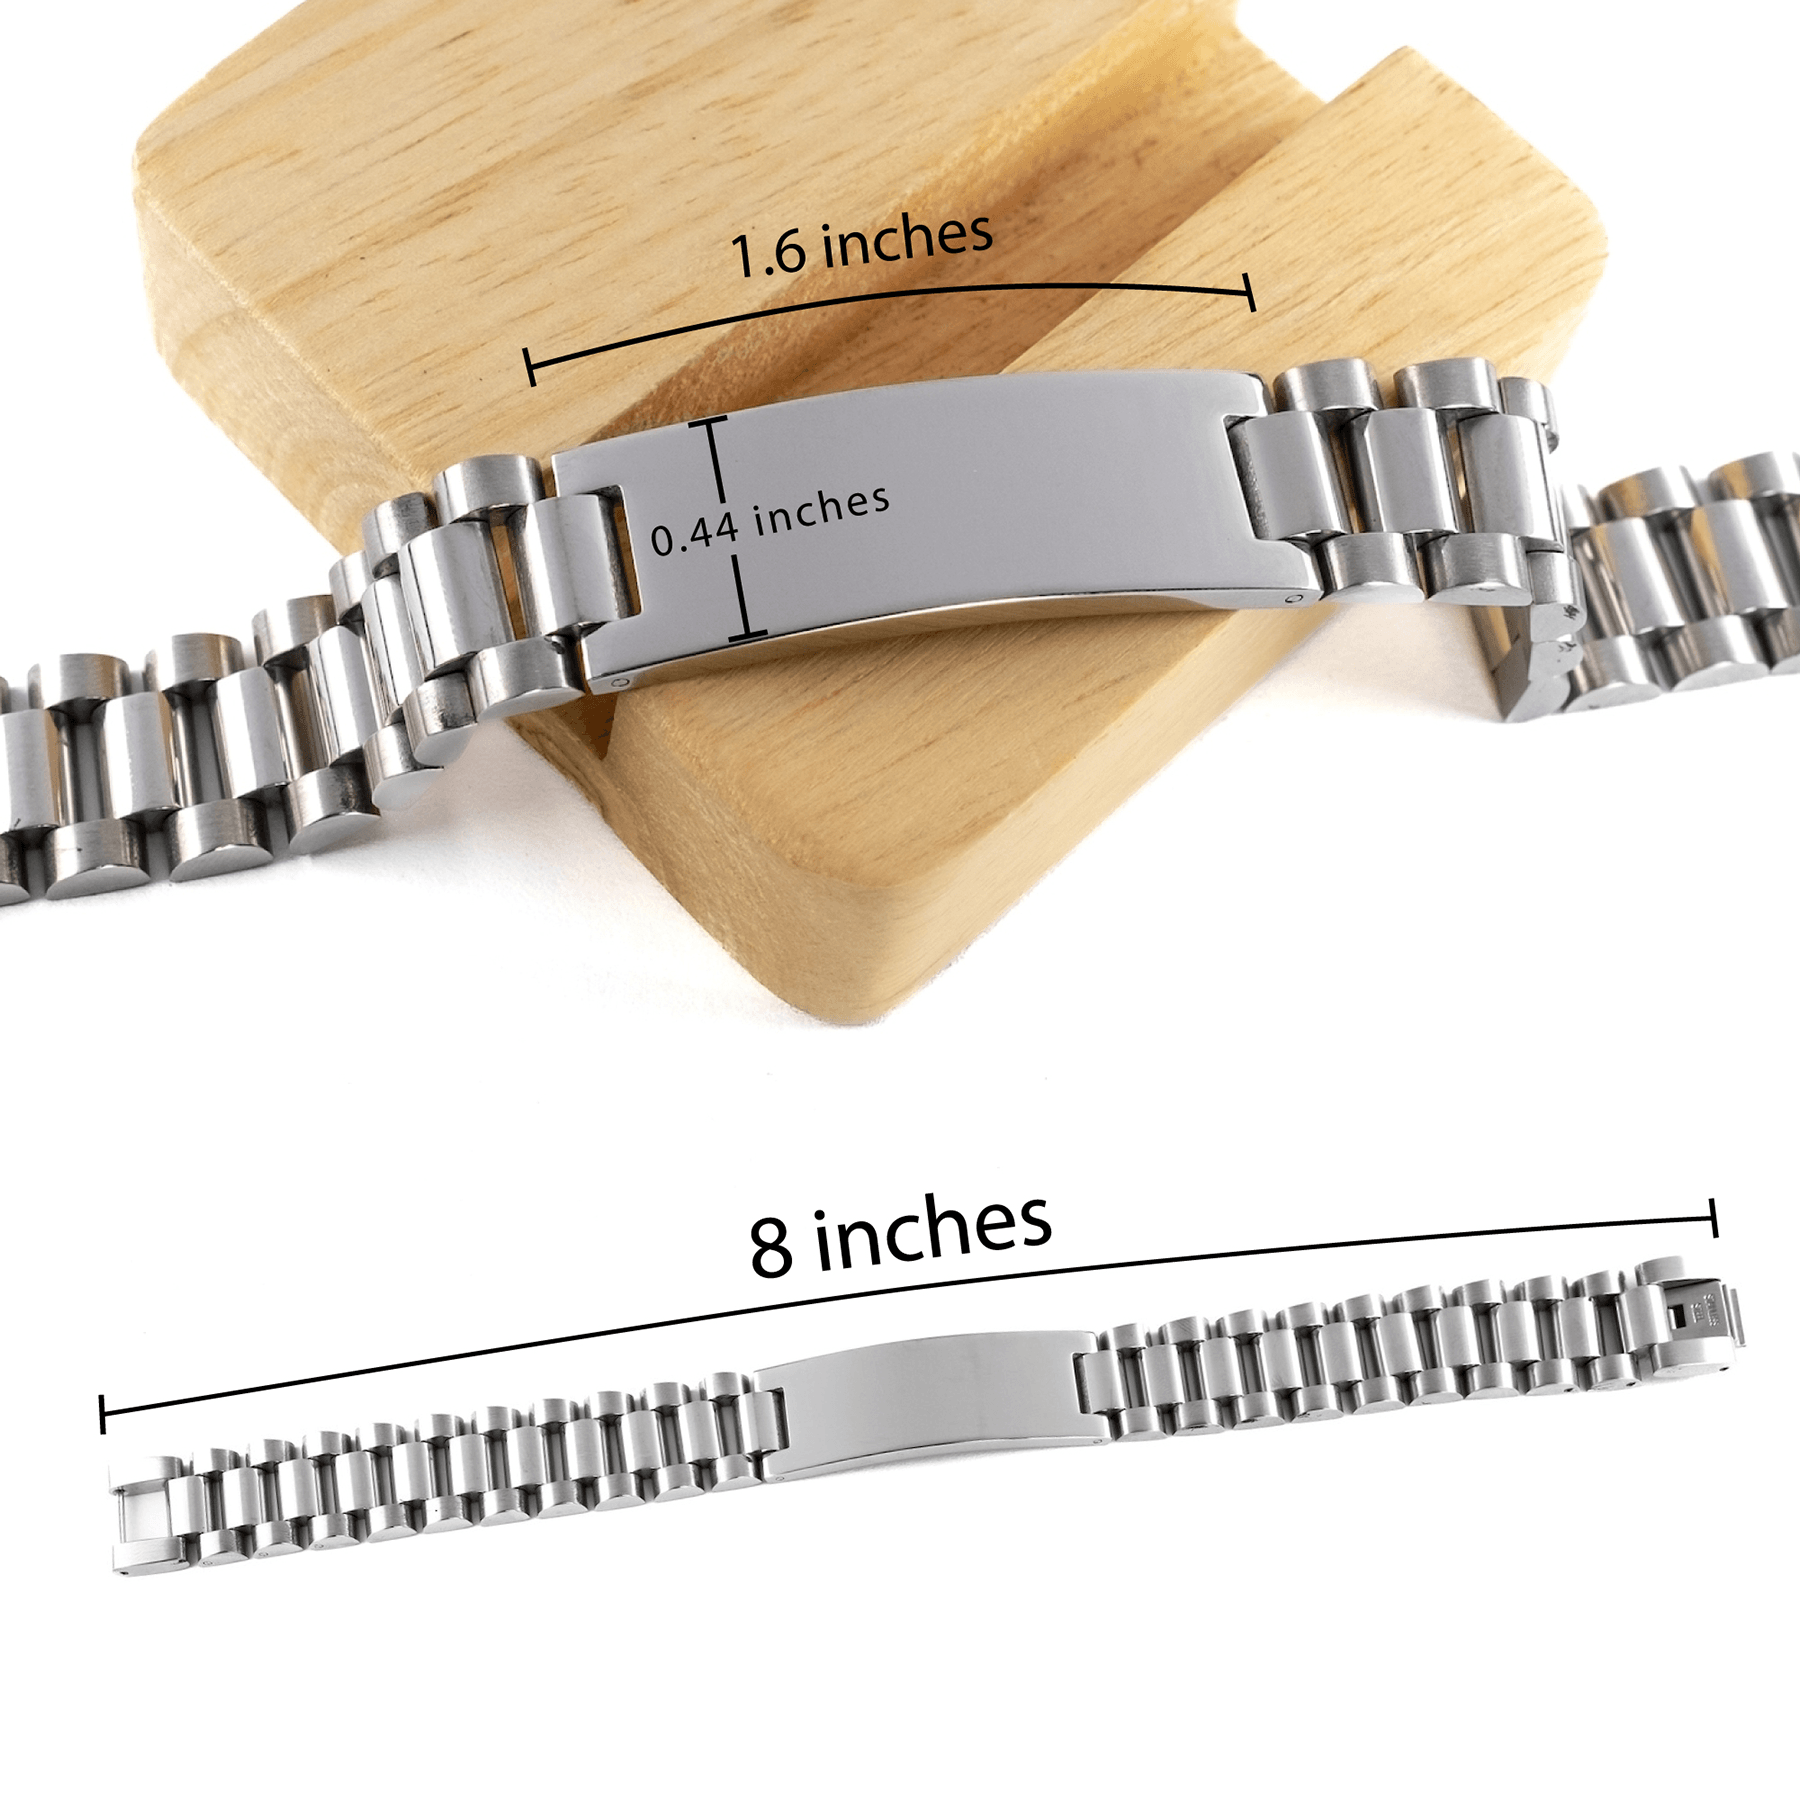 Remarkable Court Reporter Gifts, Your dedication and hard work, Inspirational Birthday Christmas Unique Ladder Stainless Steel Bracelet For Court Reporter, Coworkers, Men, Women, Friends - Mallard Moon Gift Shop